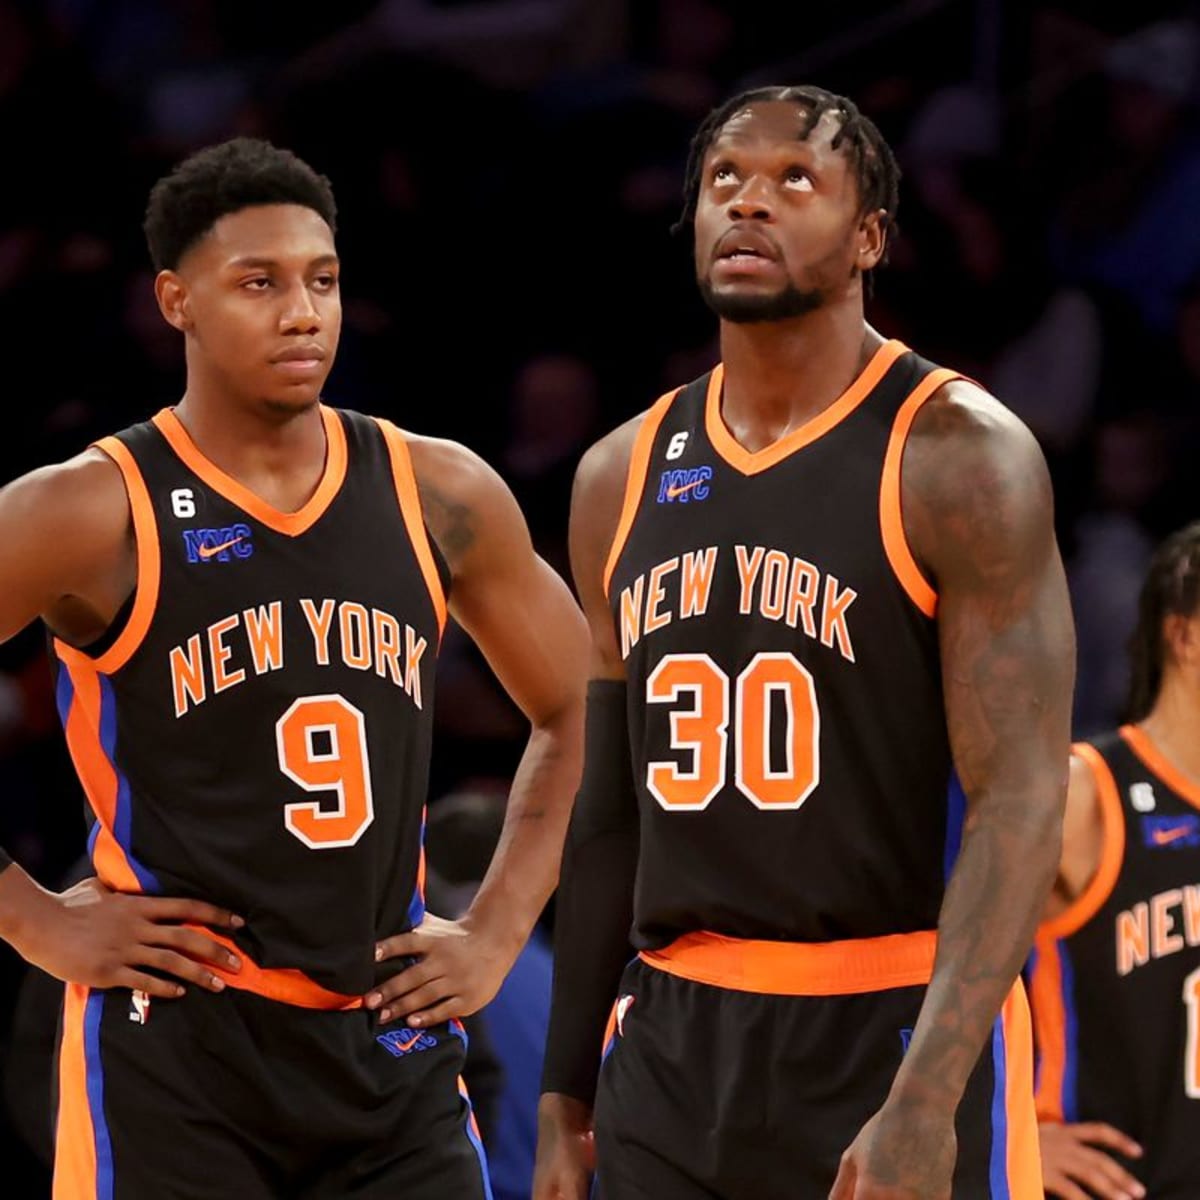 NY Knicks: Who are the top playoff performers on the roster?